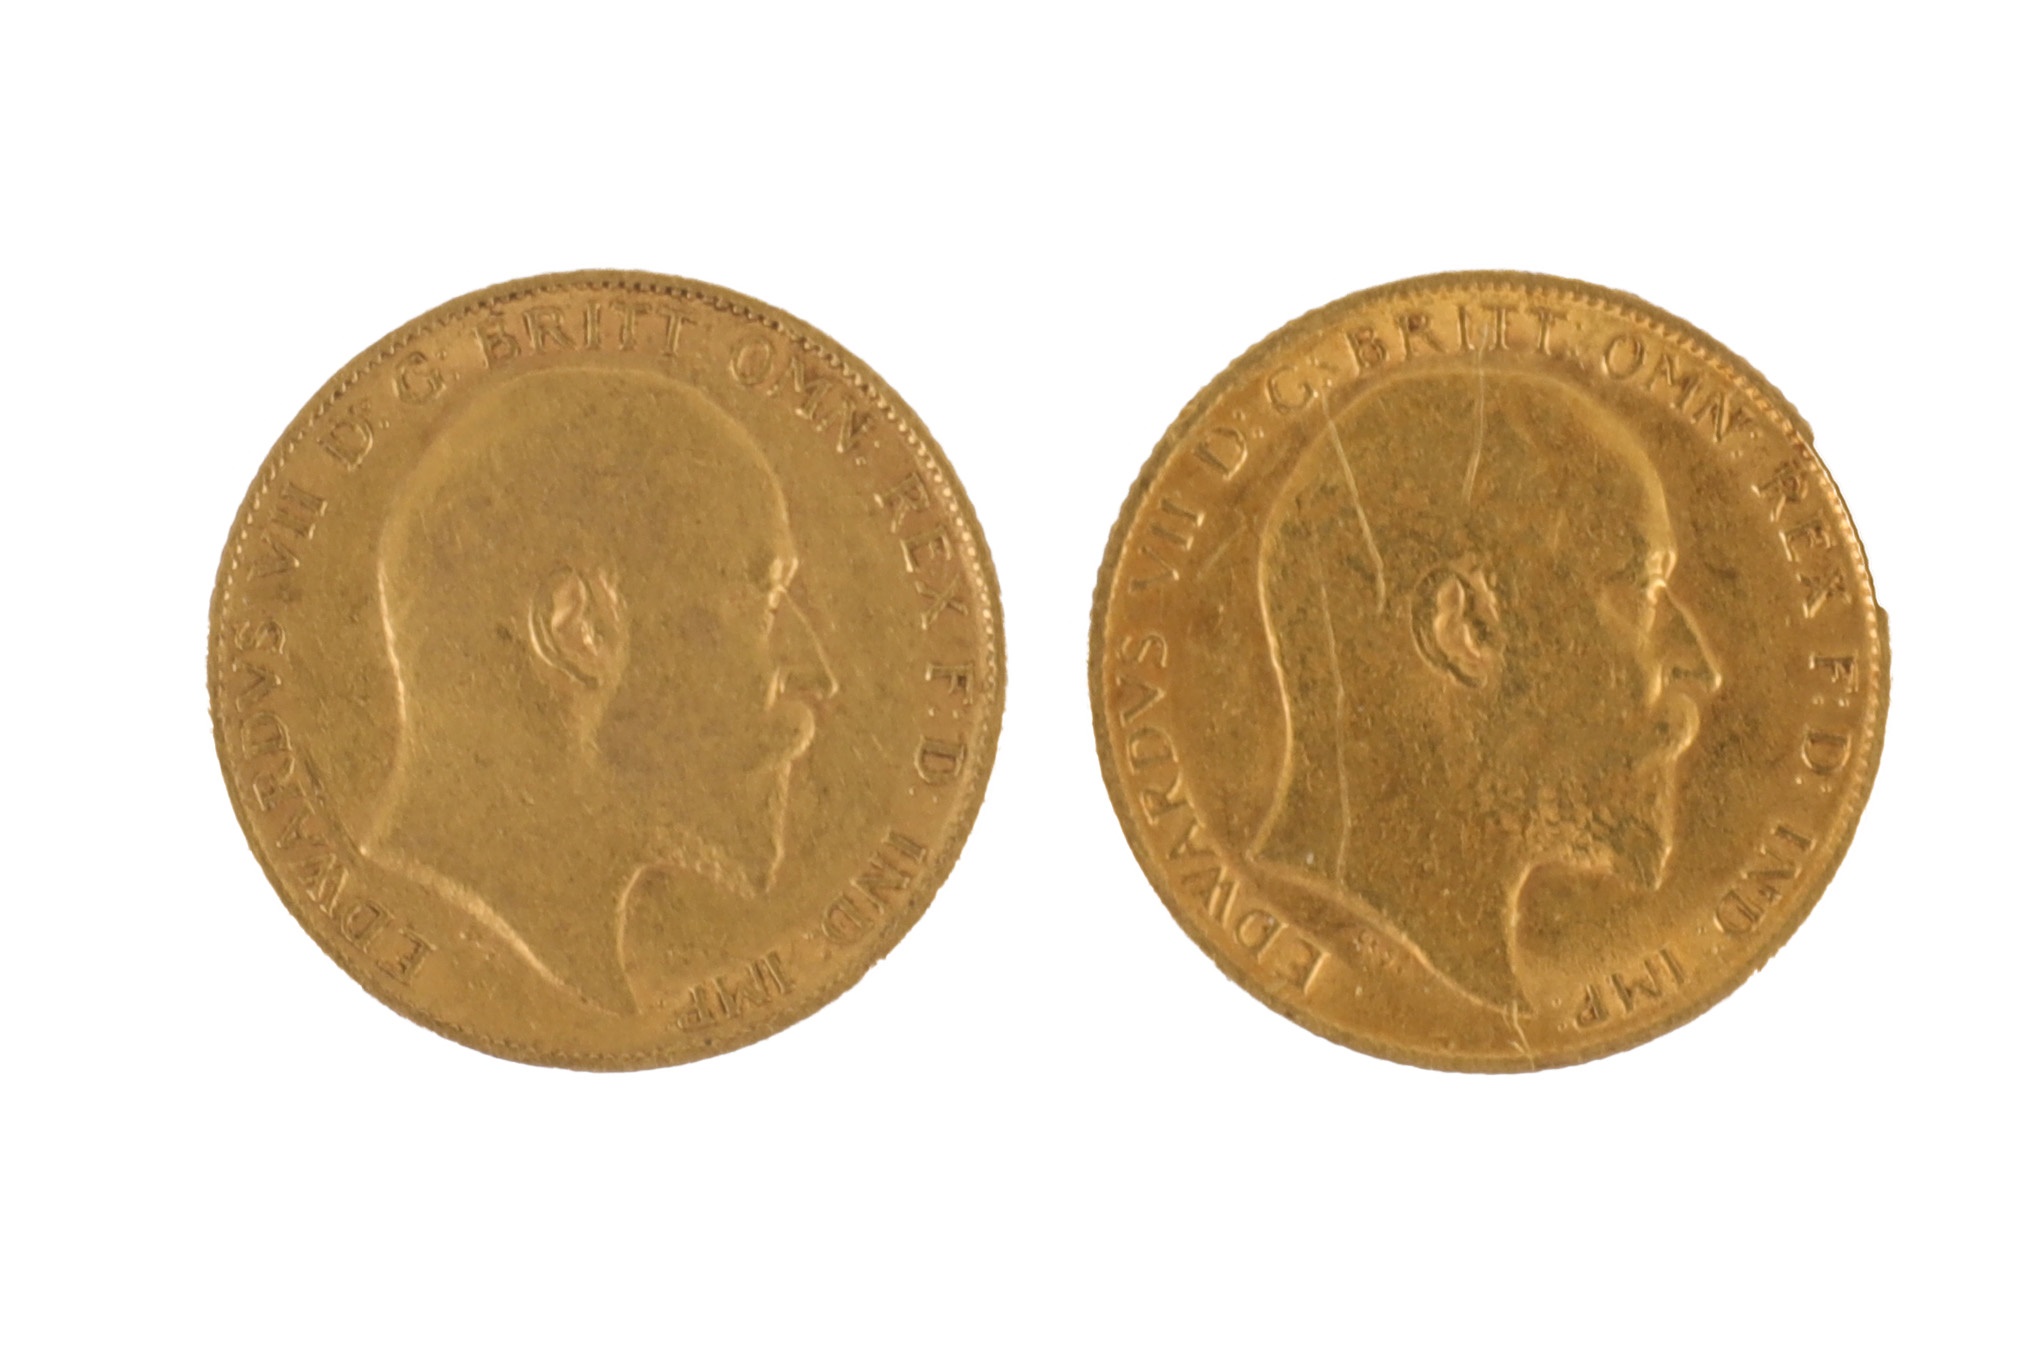 Two Edward VII half sovereigns, dated 1902 and 1908 - Image 2 of 2